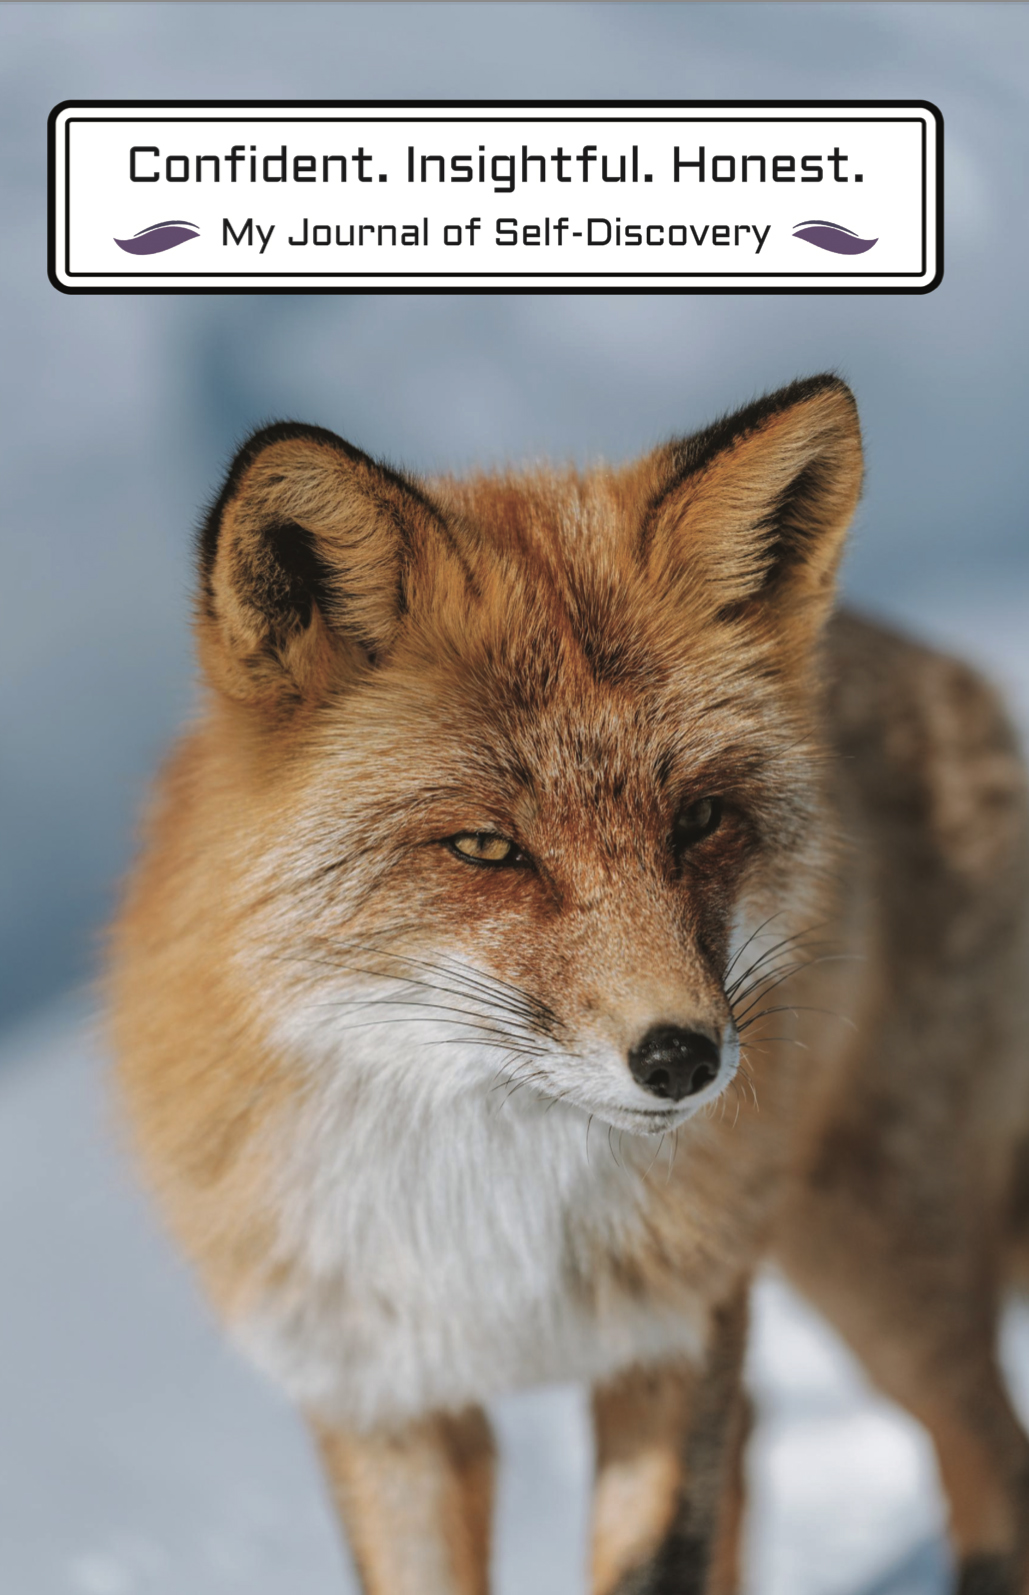 Image of a fox on the front cover of this journal